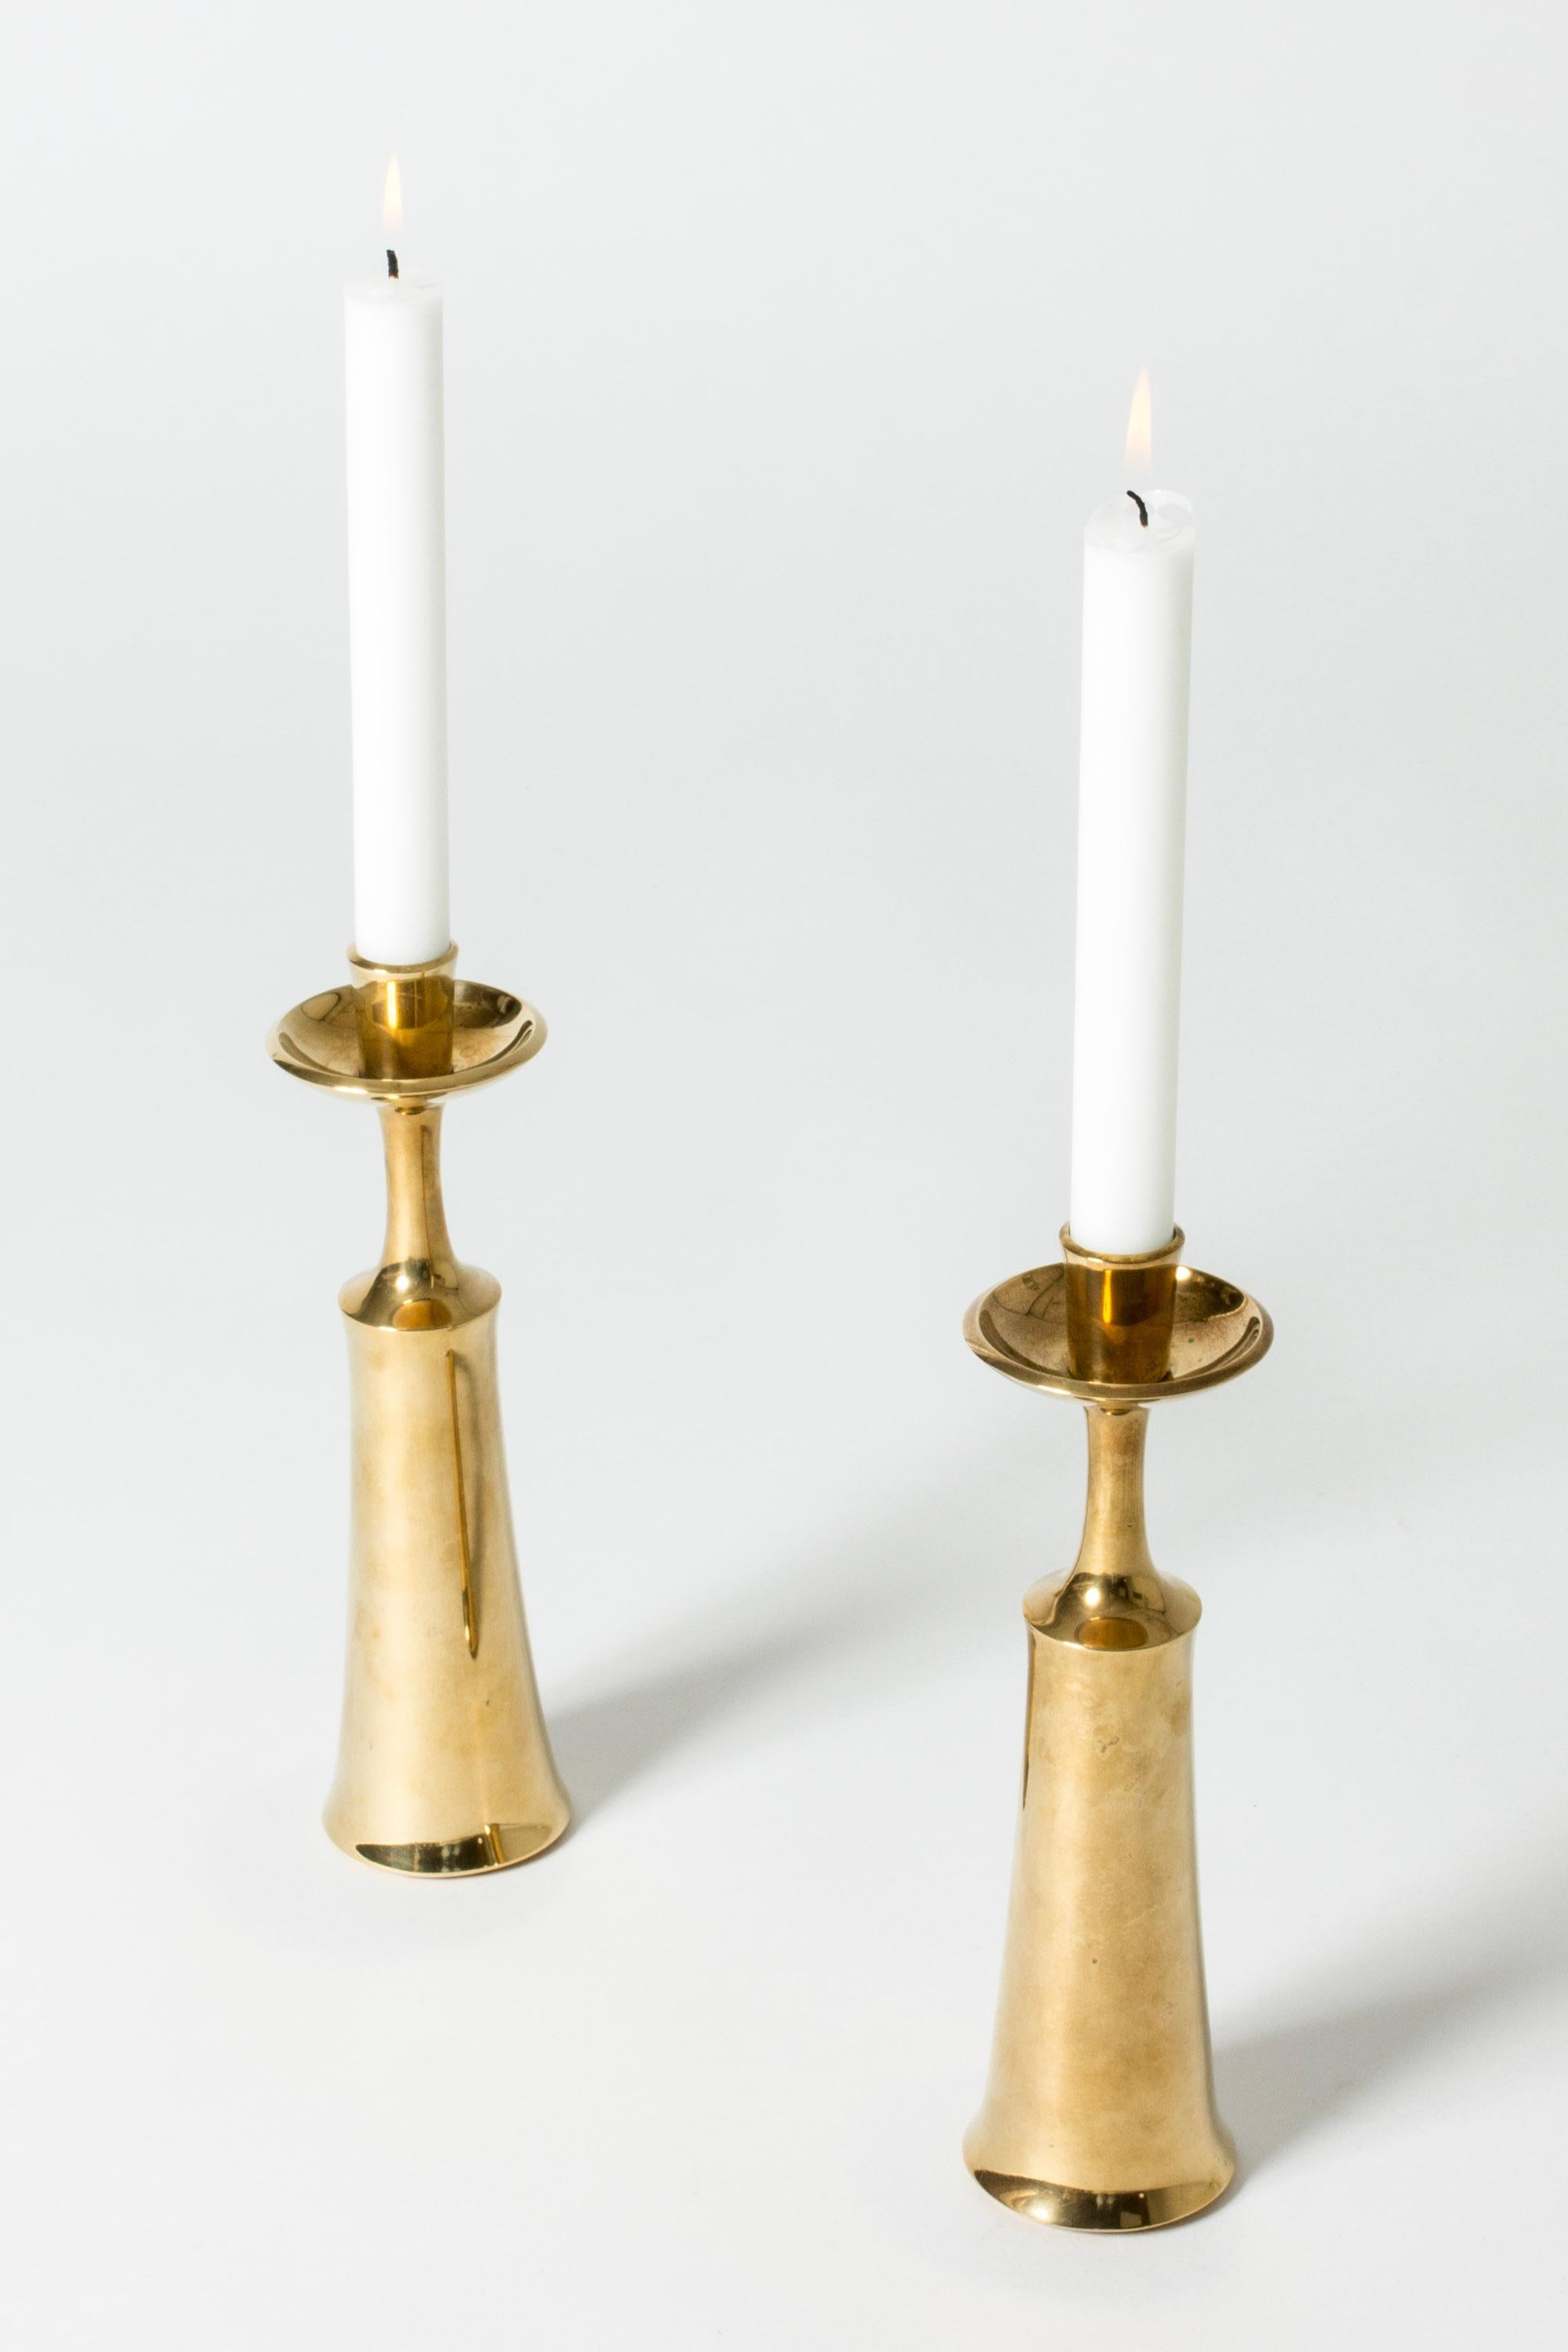 Pair of elegant brass candlesticks by Jens Quistgaard, in a sleek, tapering form.